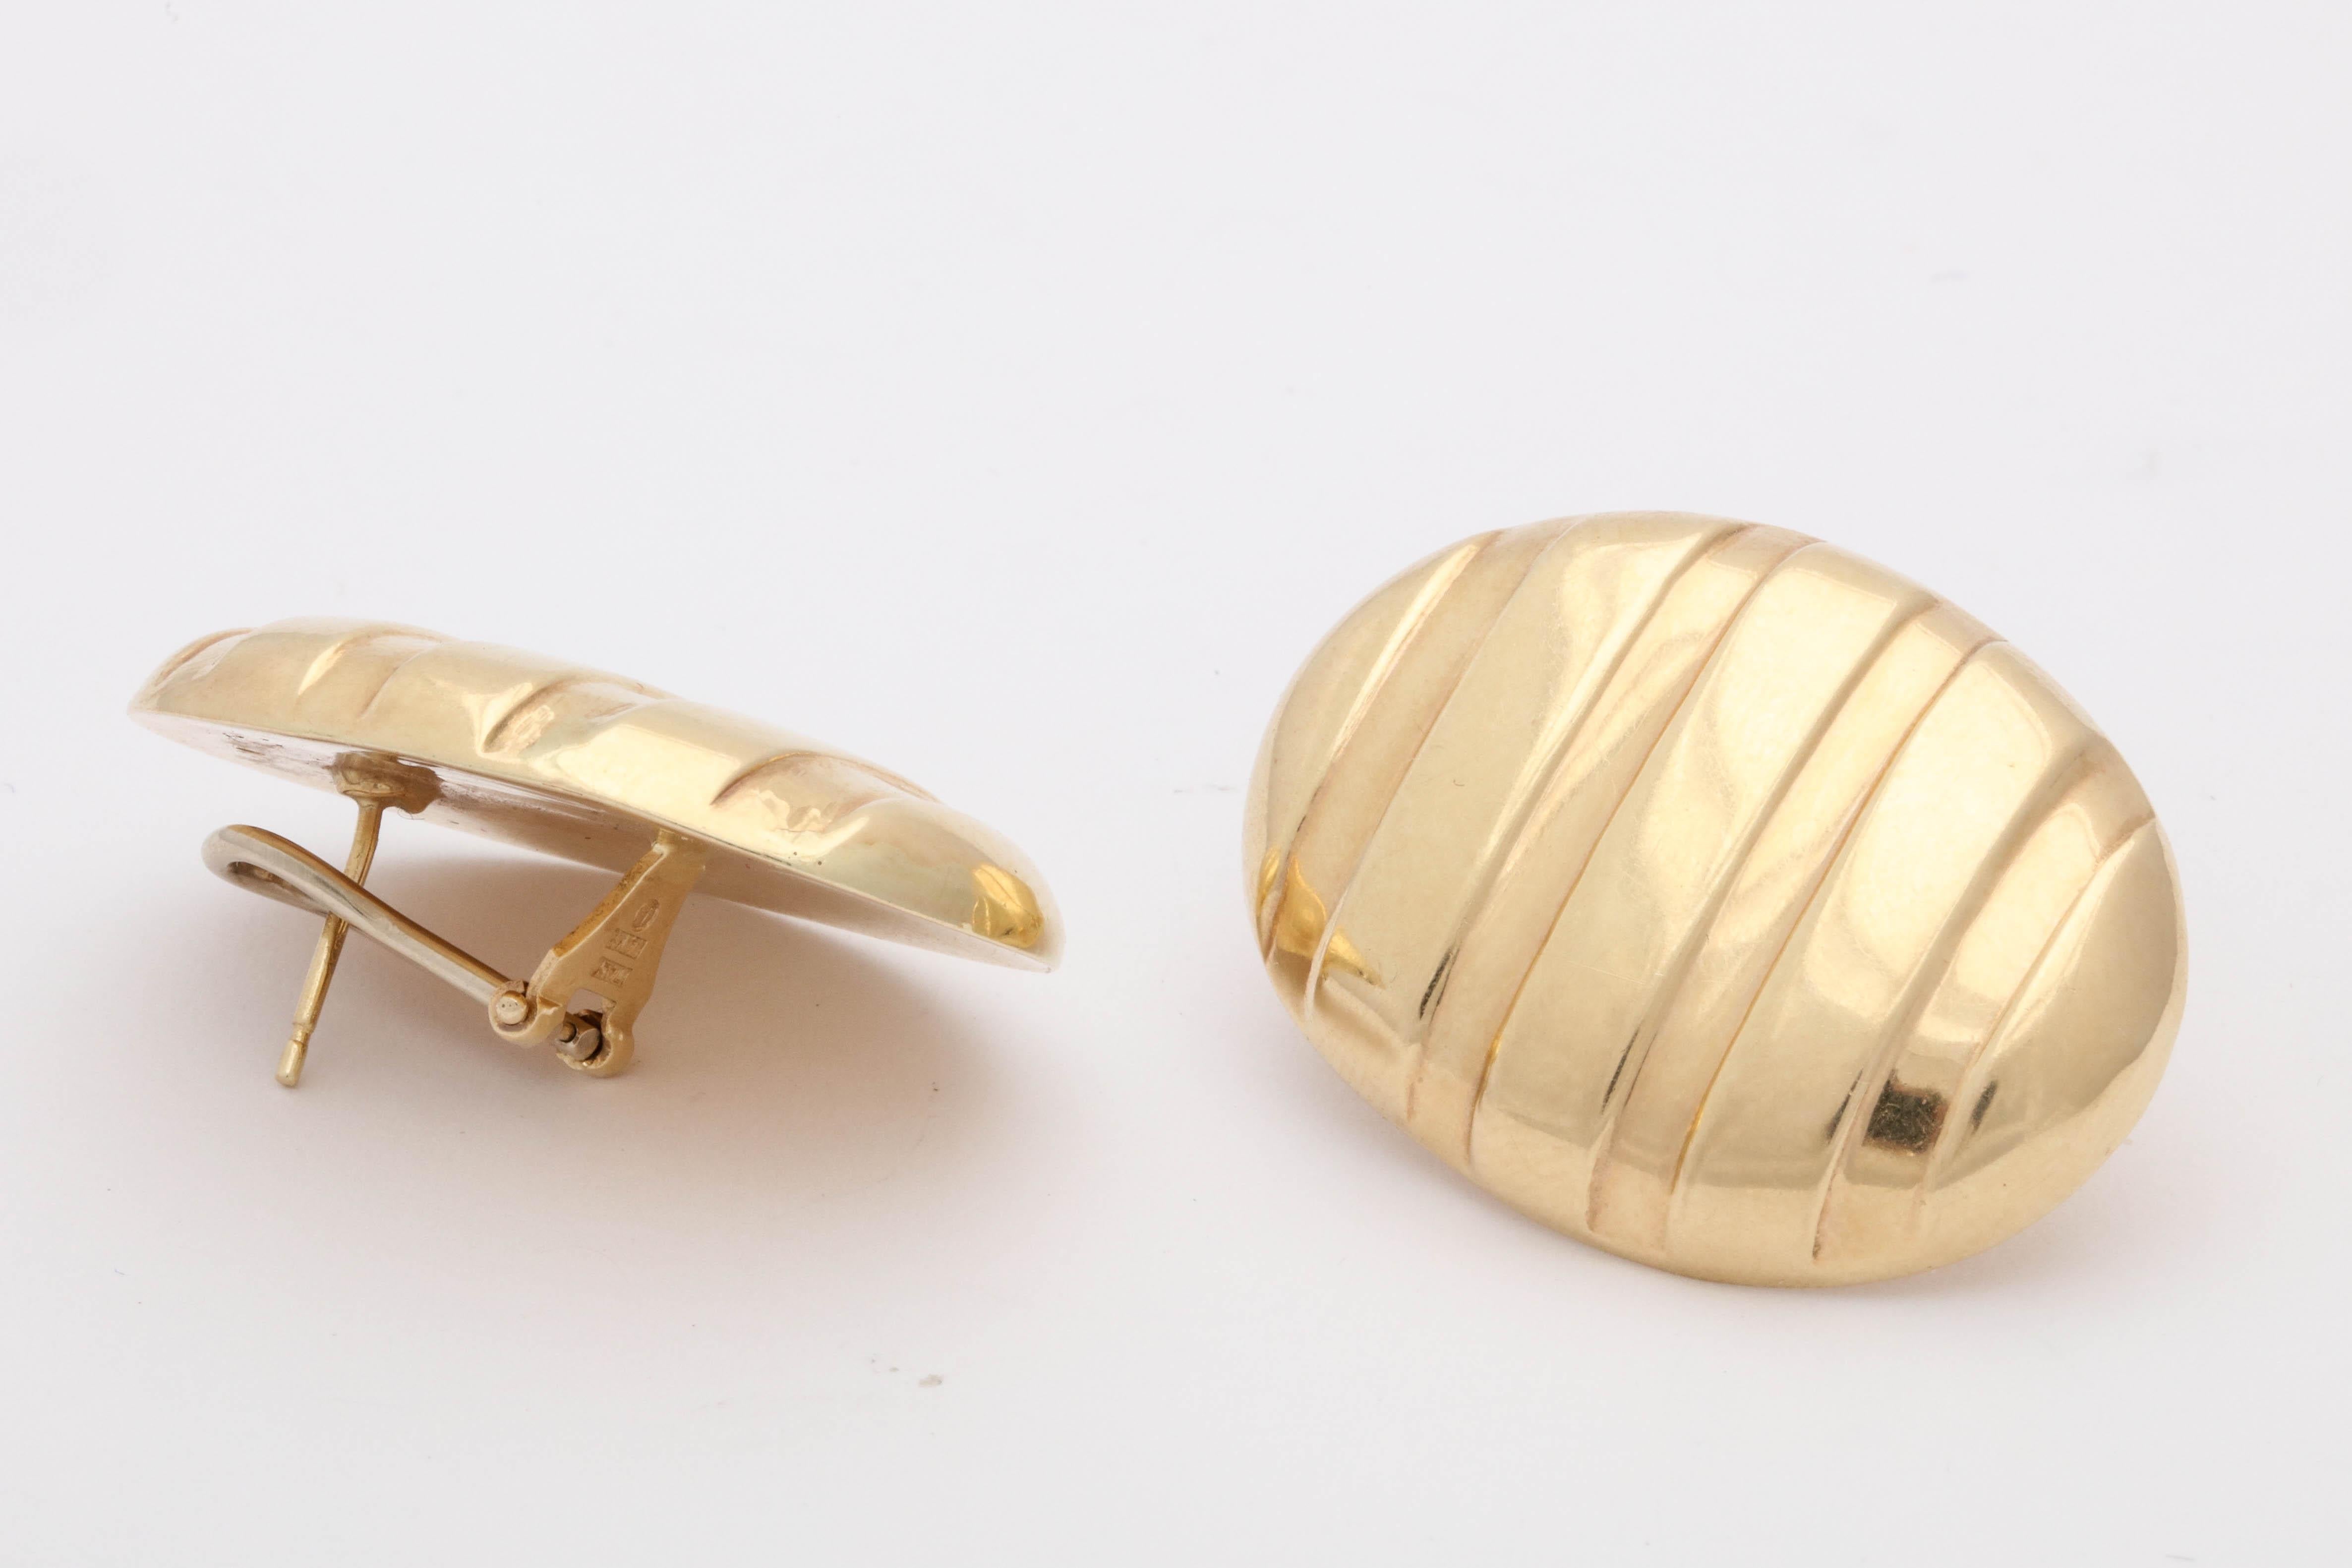 Women's 1980s Oval Shaped High Polish Ridged Gold Textured Earclips with Posts